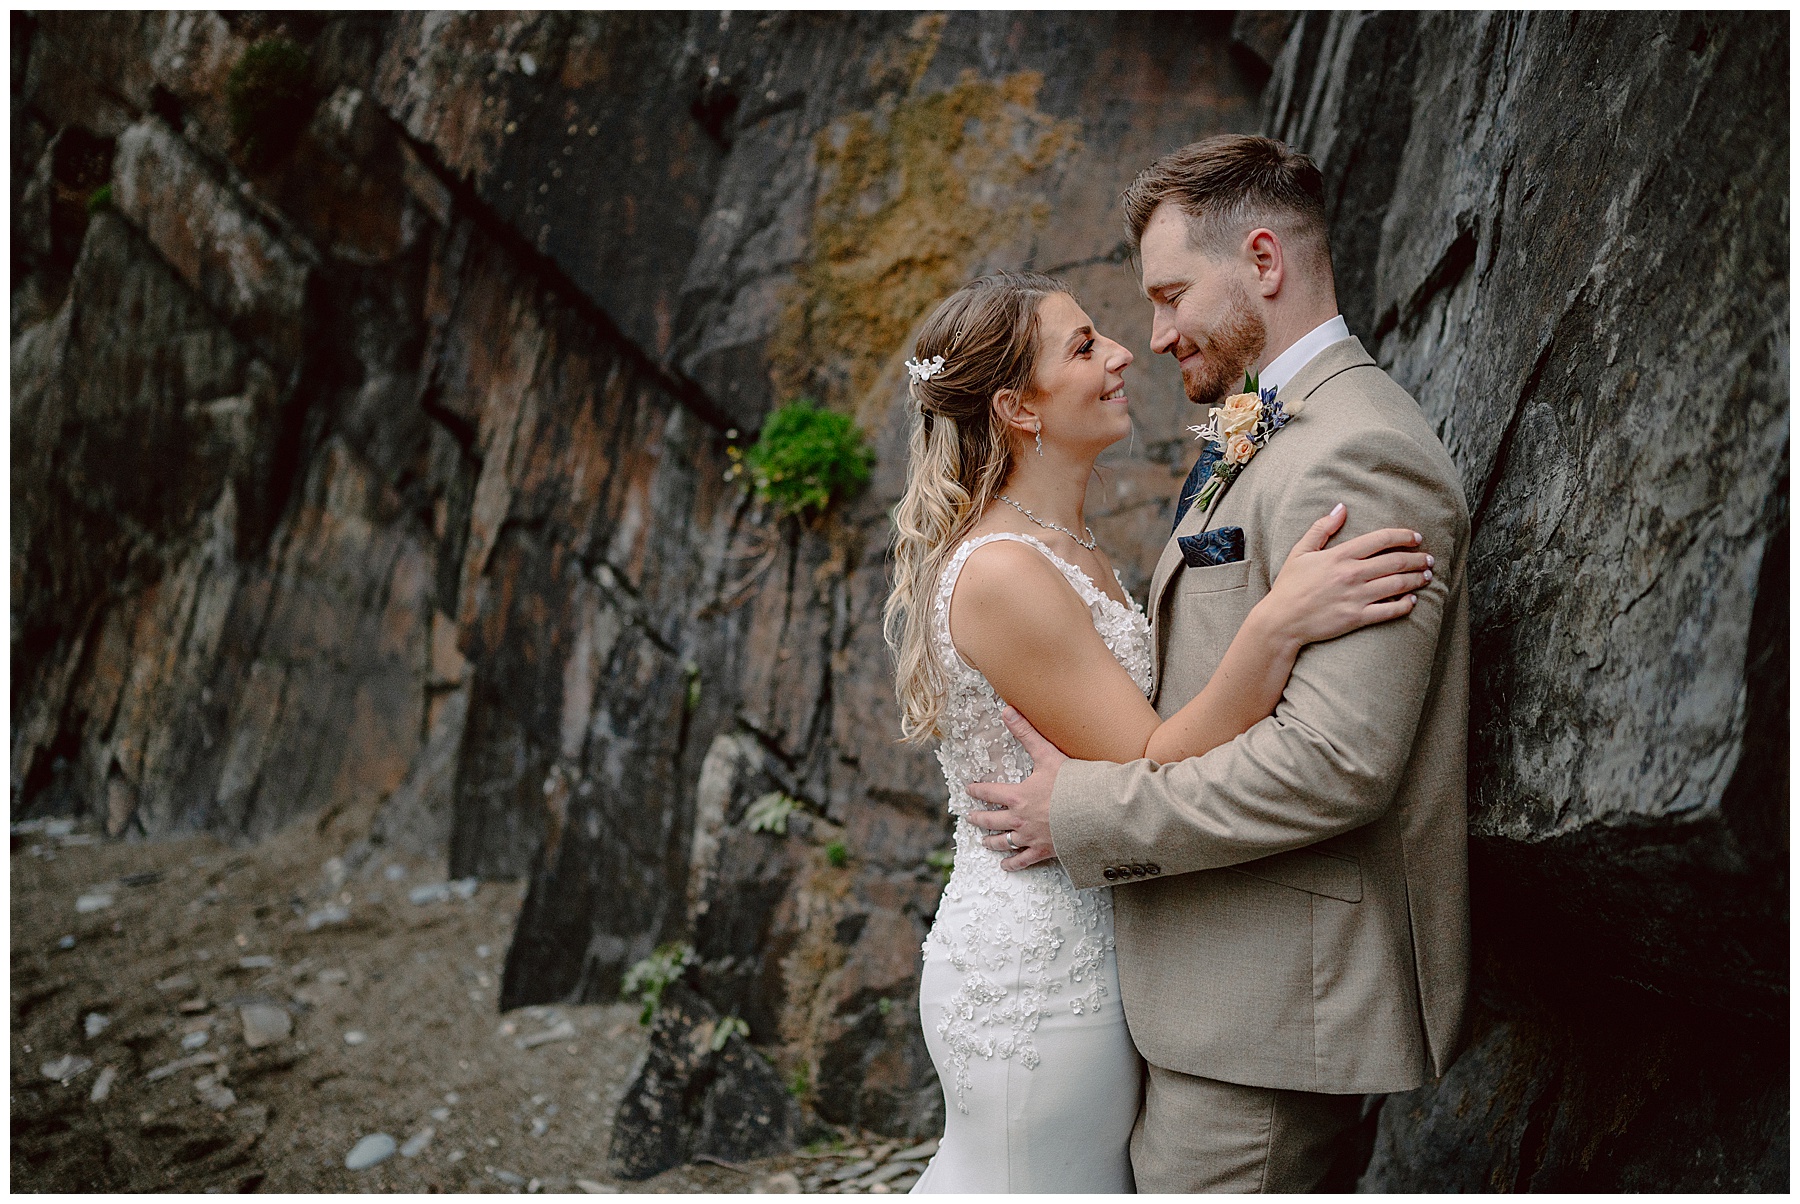 Bride & Groom Portraits at The Cliff Hotel